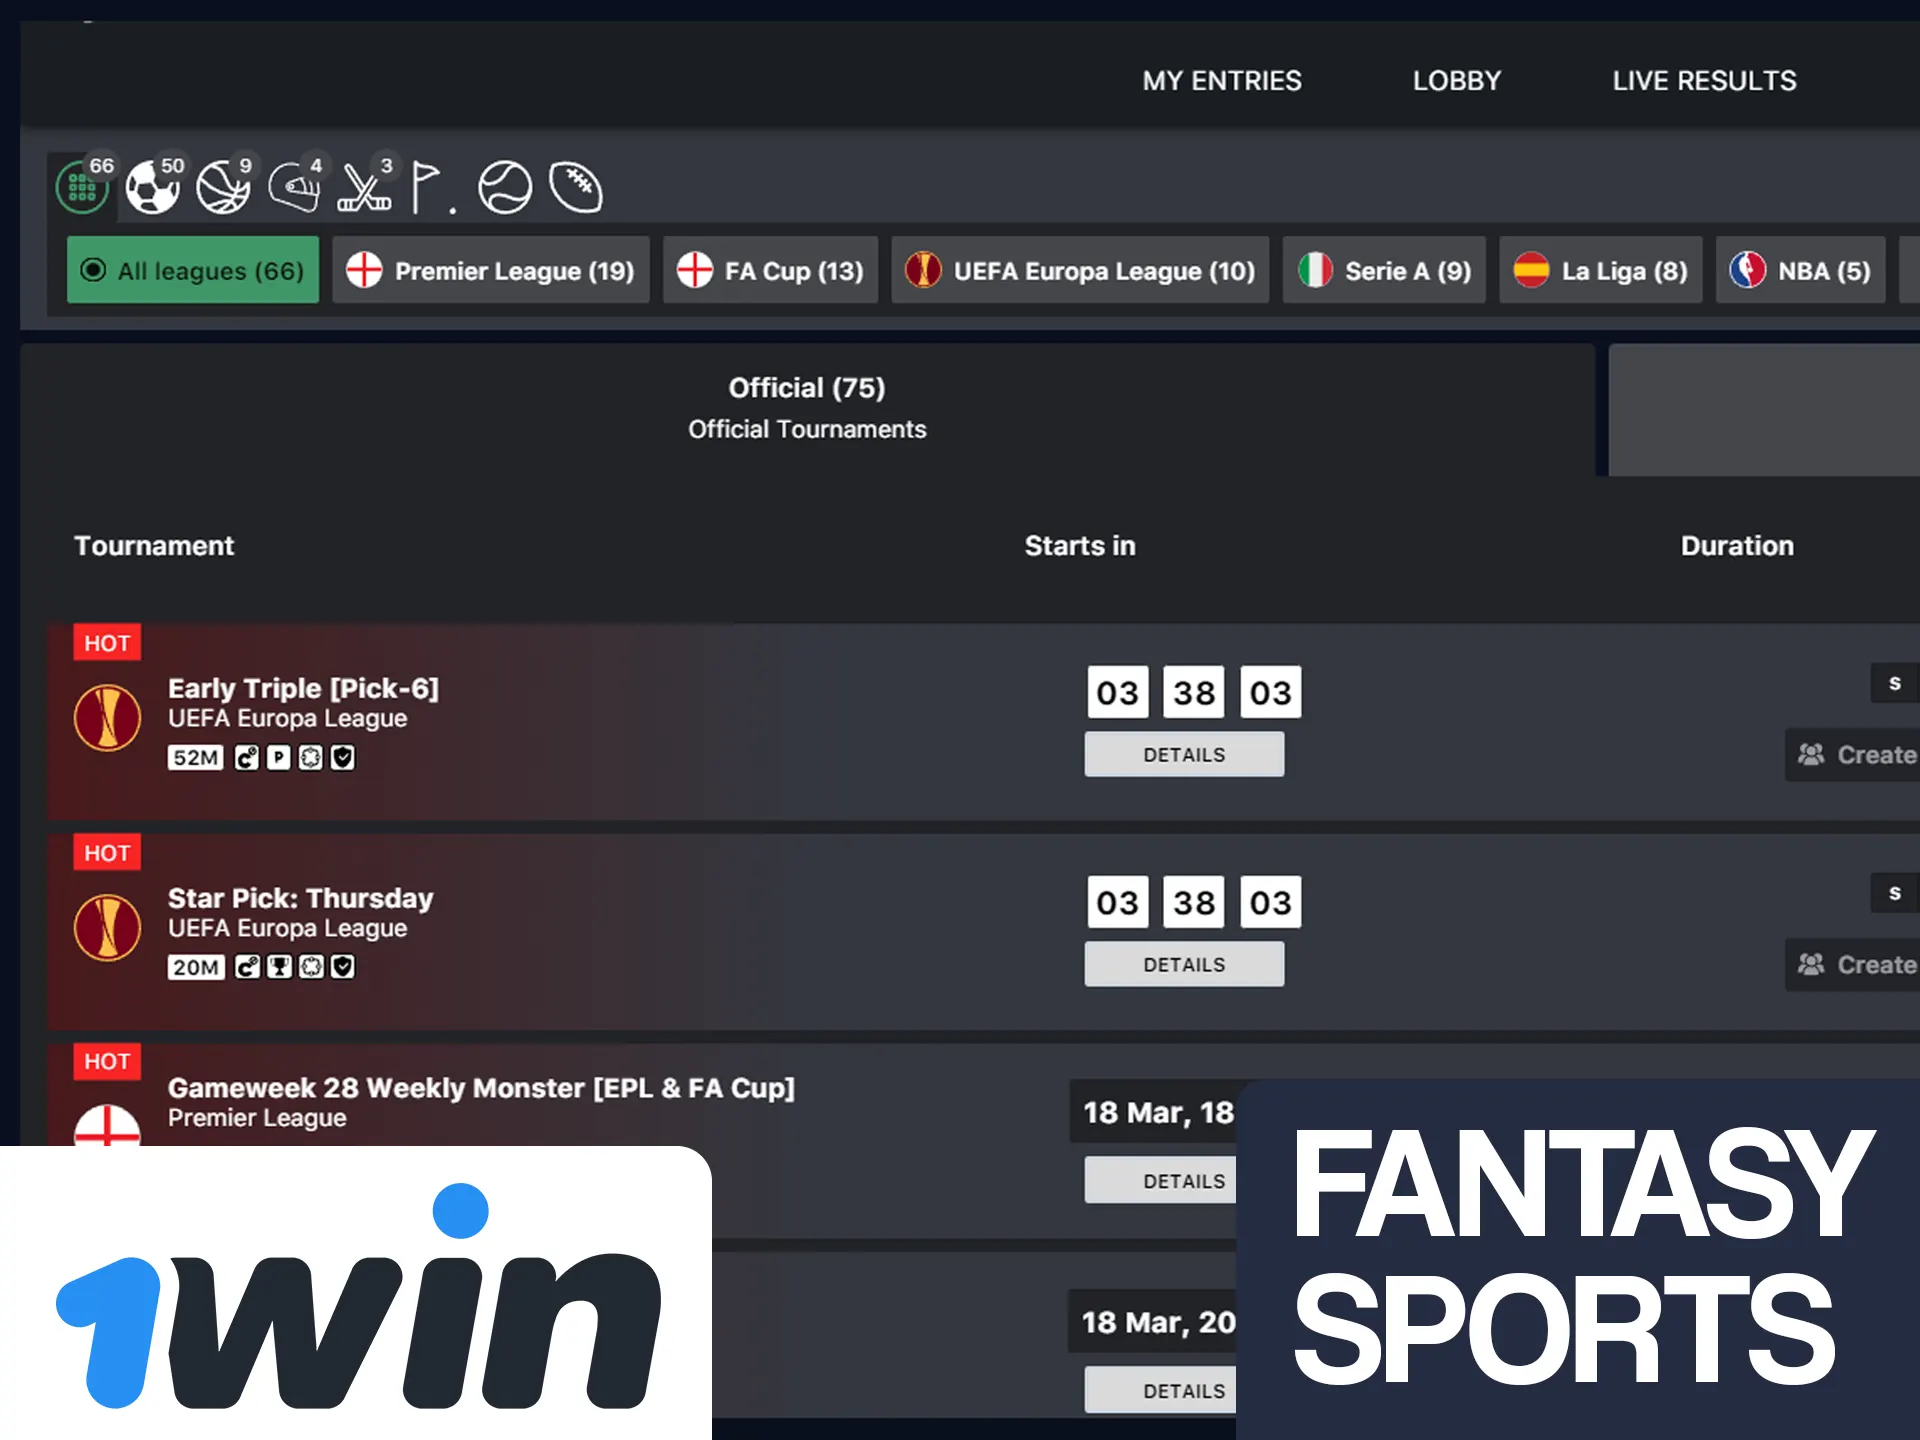 Bet on fantasy sports in league format at 1win.